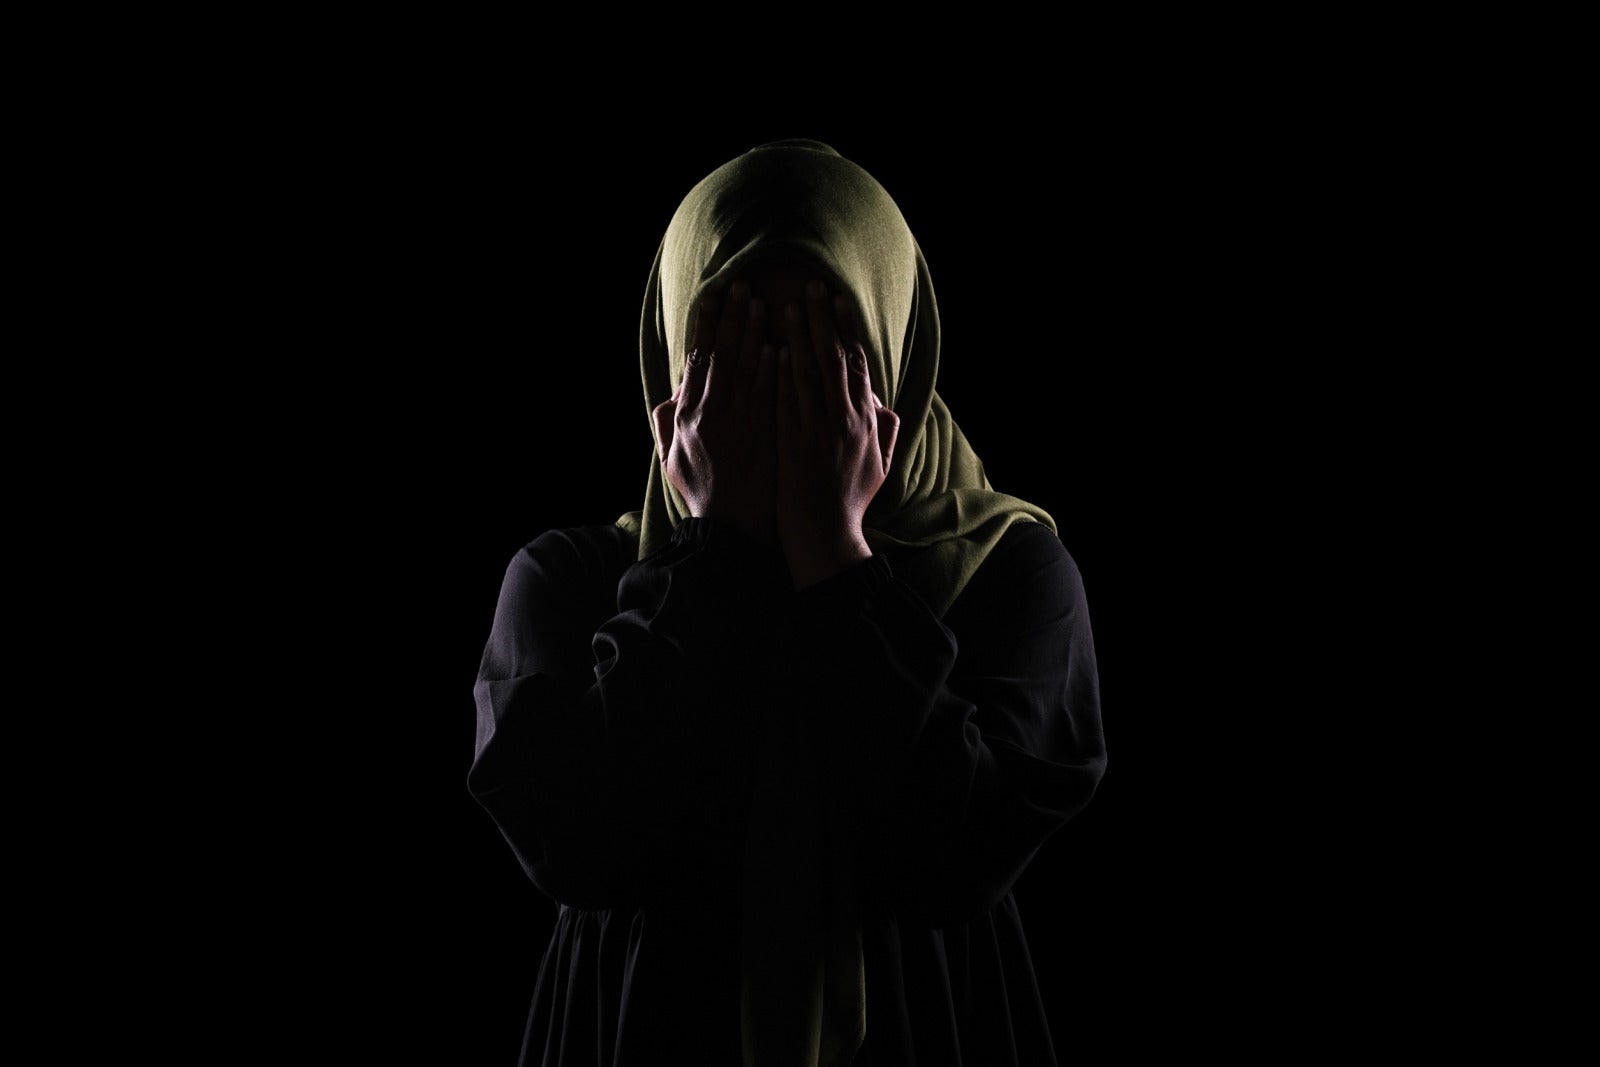 muslim woman young cover face scared dark